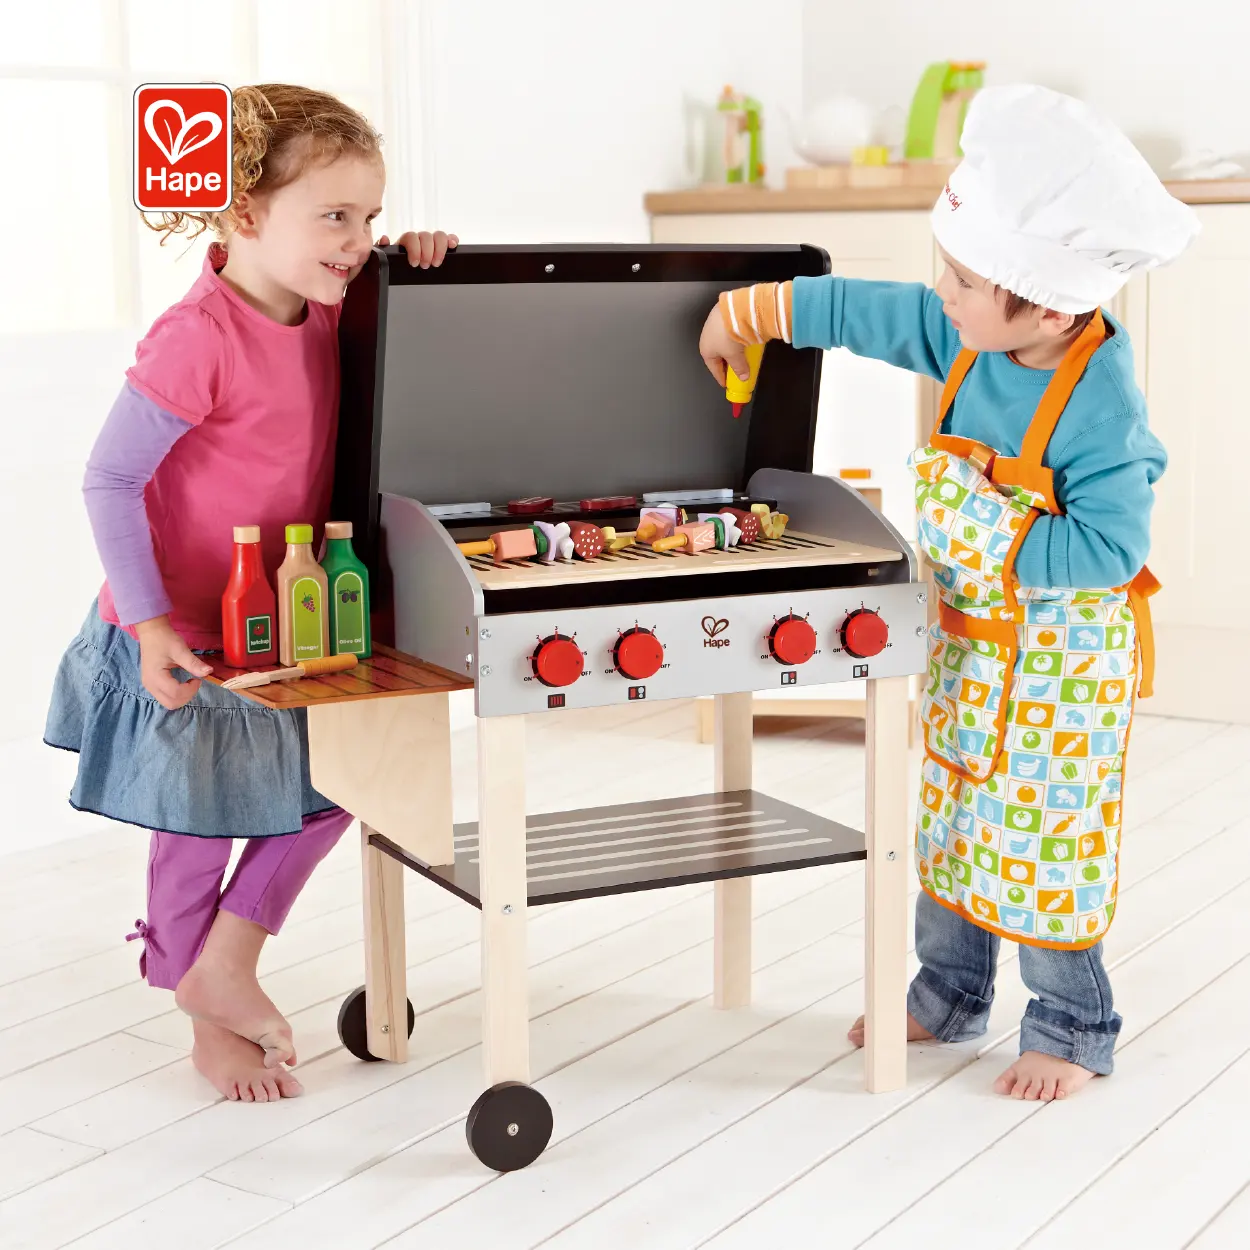 Hape 2021 New Design Wooden Bbq Grill Toys For Kids Play Wooden Simulation Barbecue Set Large Scene Kitchen Toy